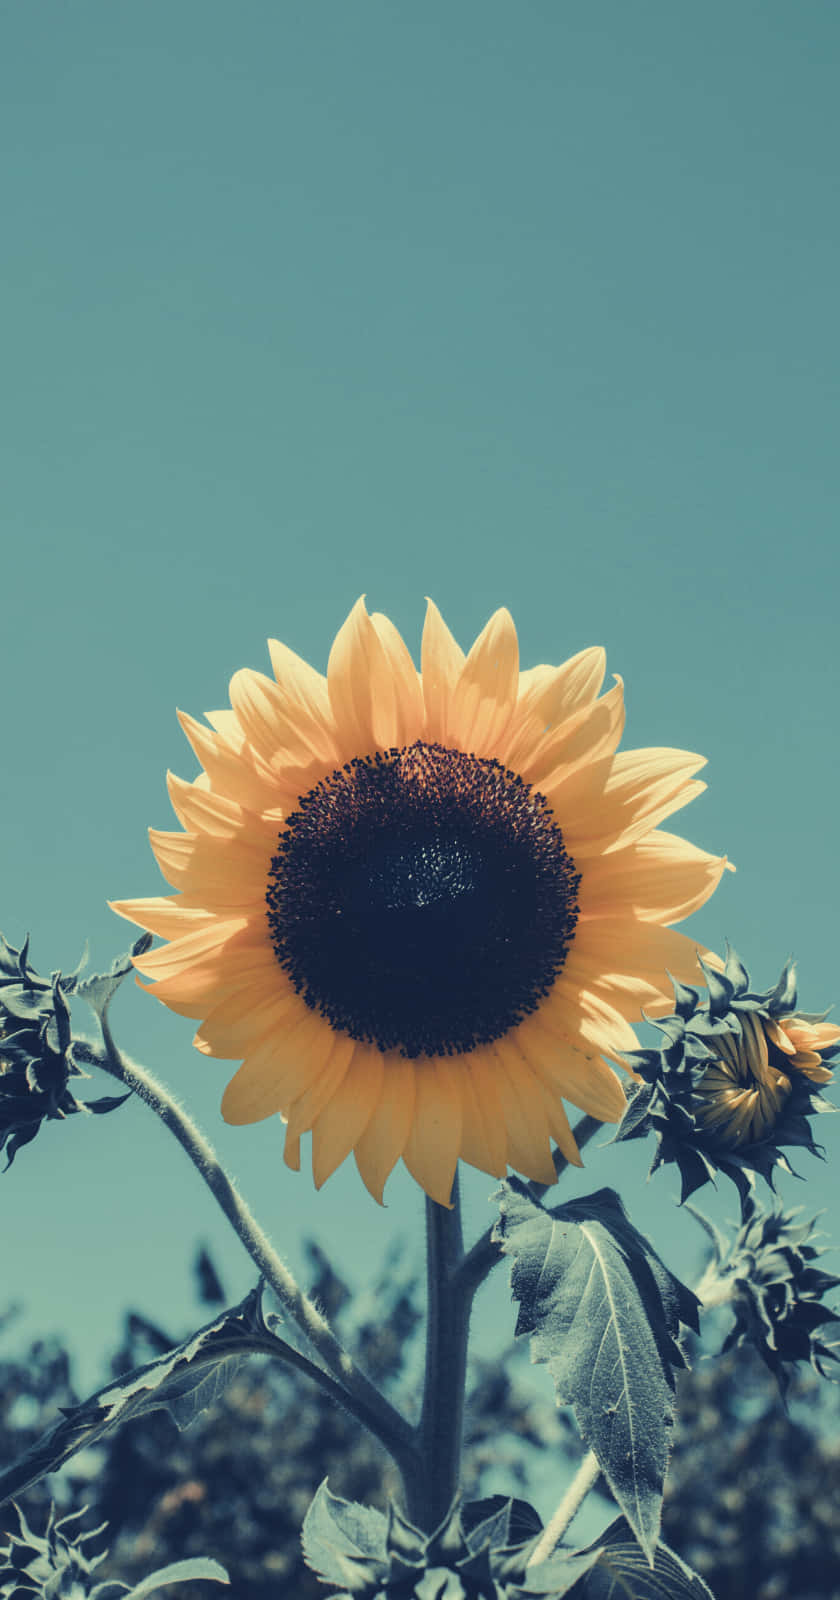 Brighten up your day with the vibrant beauty of yellow sunflowers Wallpaper